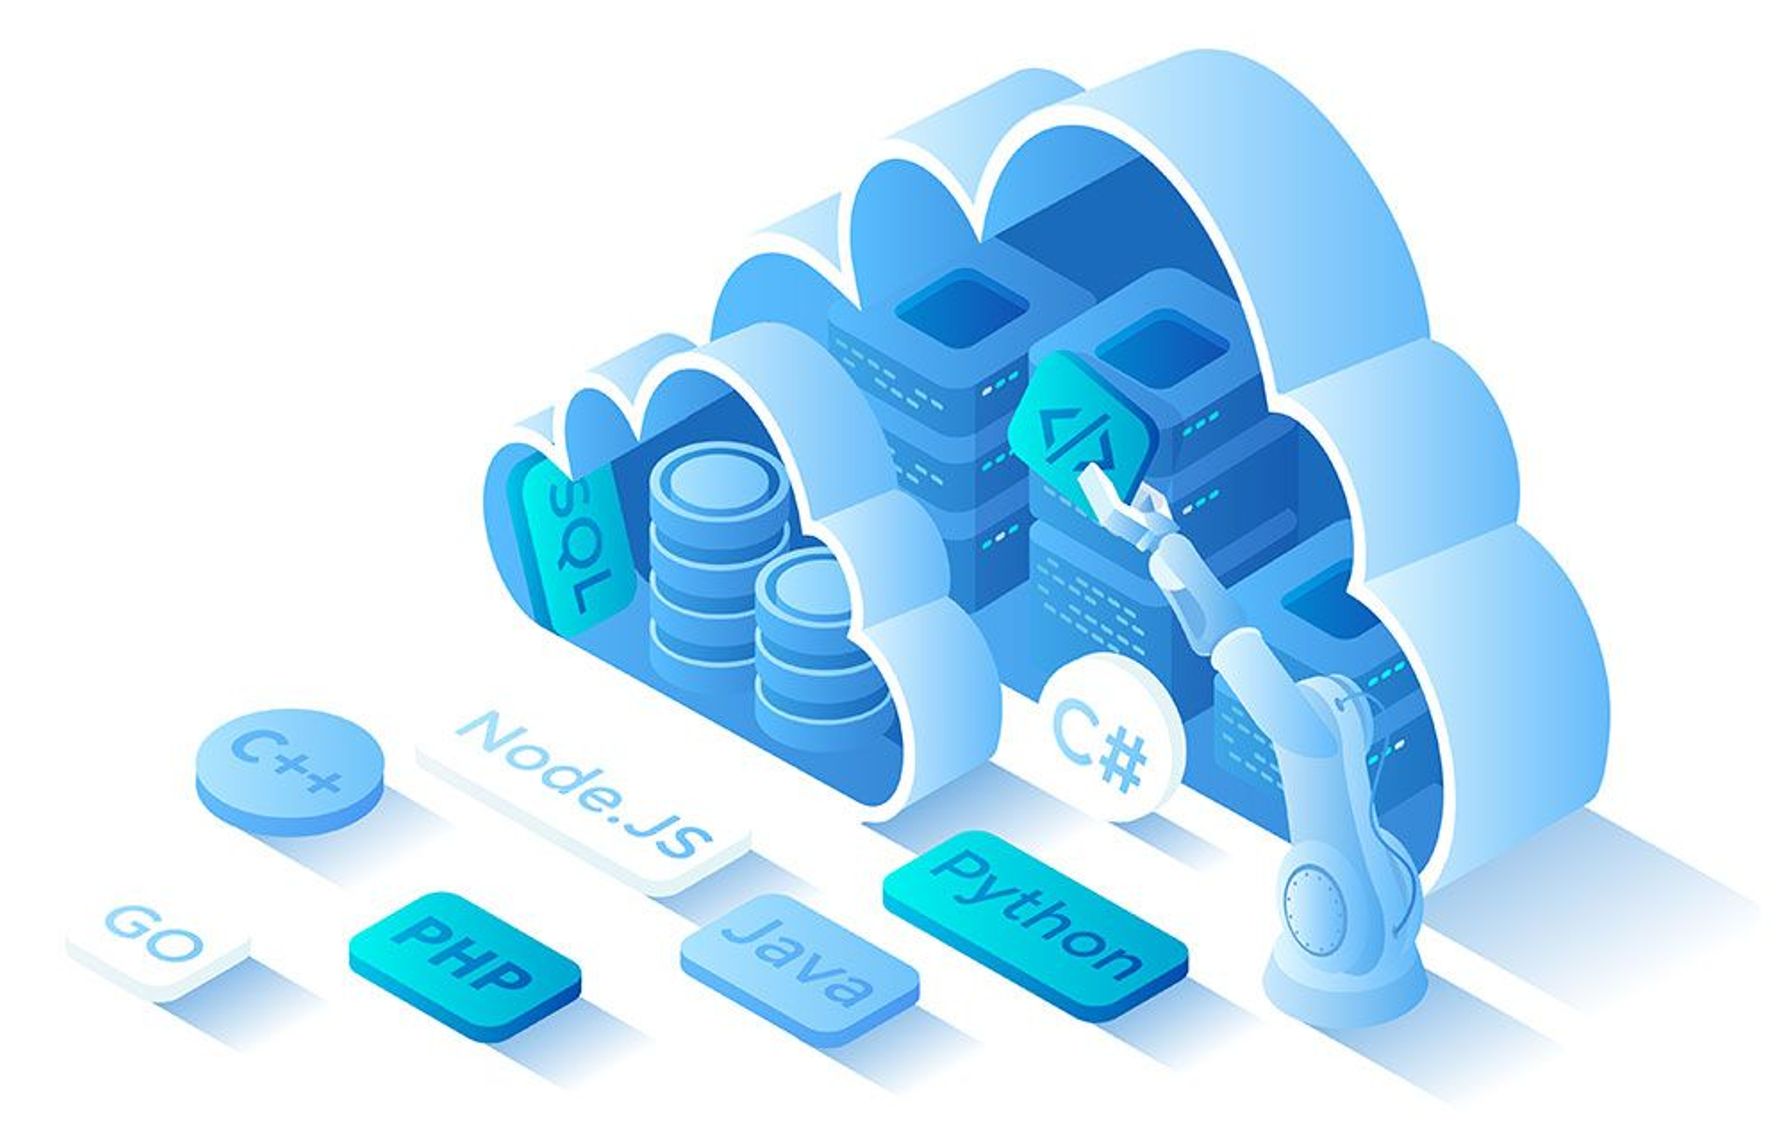 Illustration of a clouds and the languages commonly associated with the back end development process.